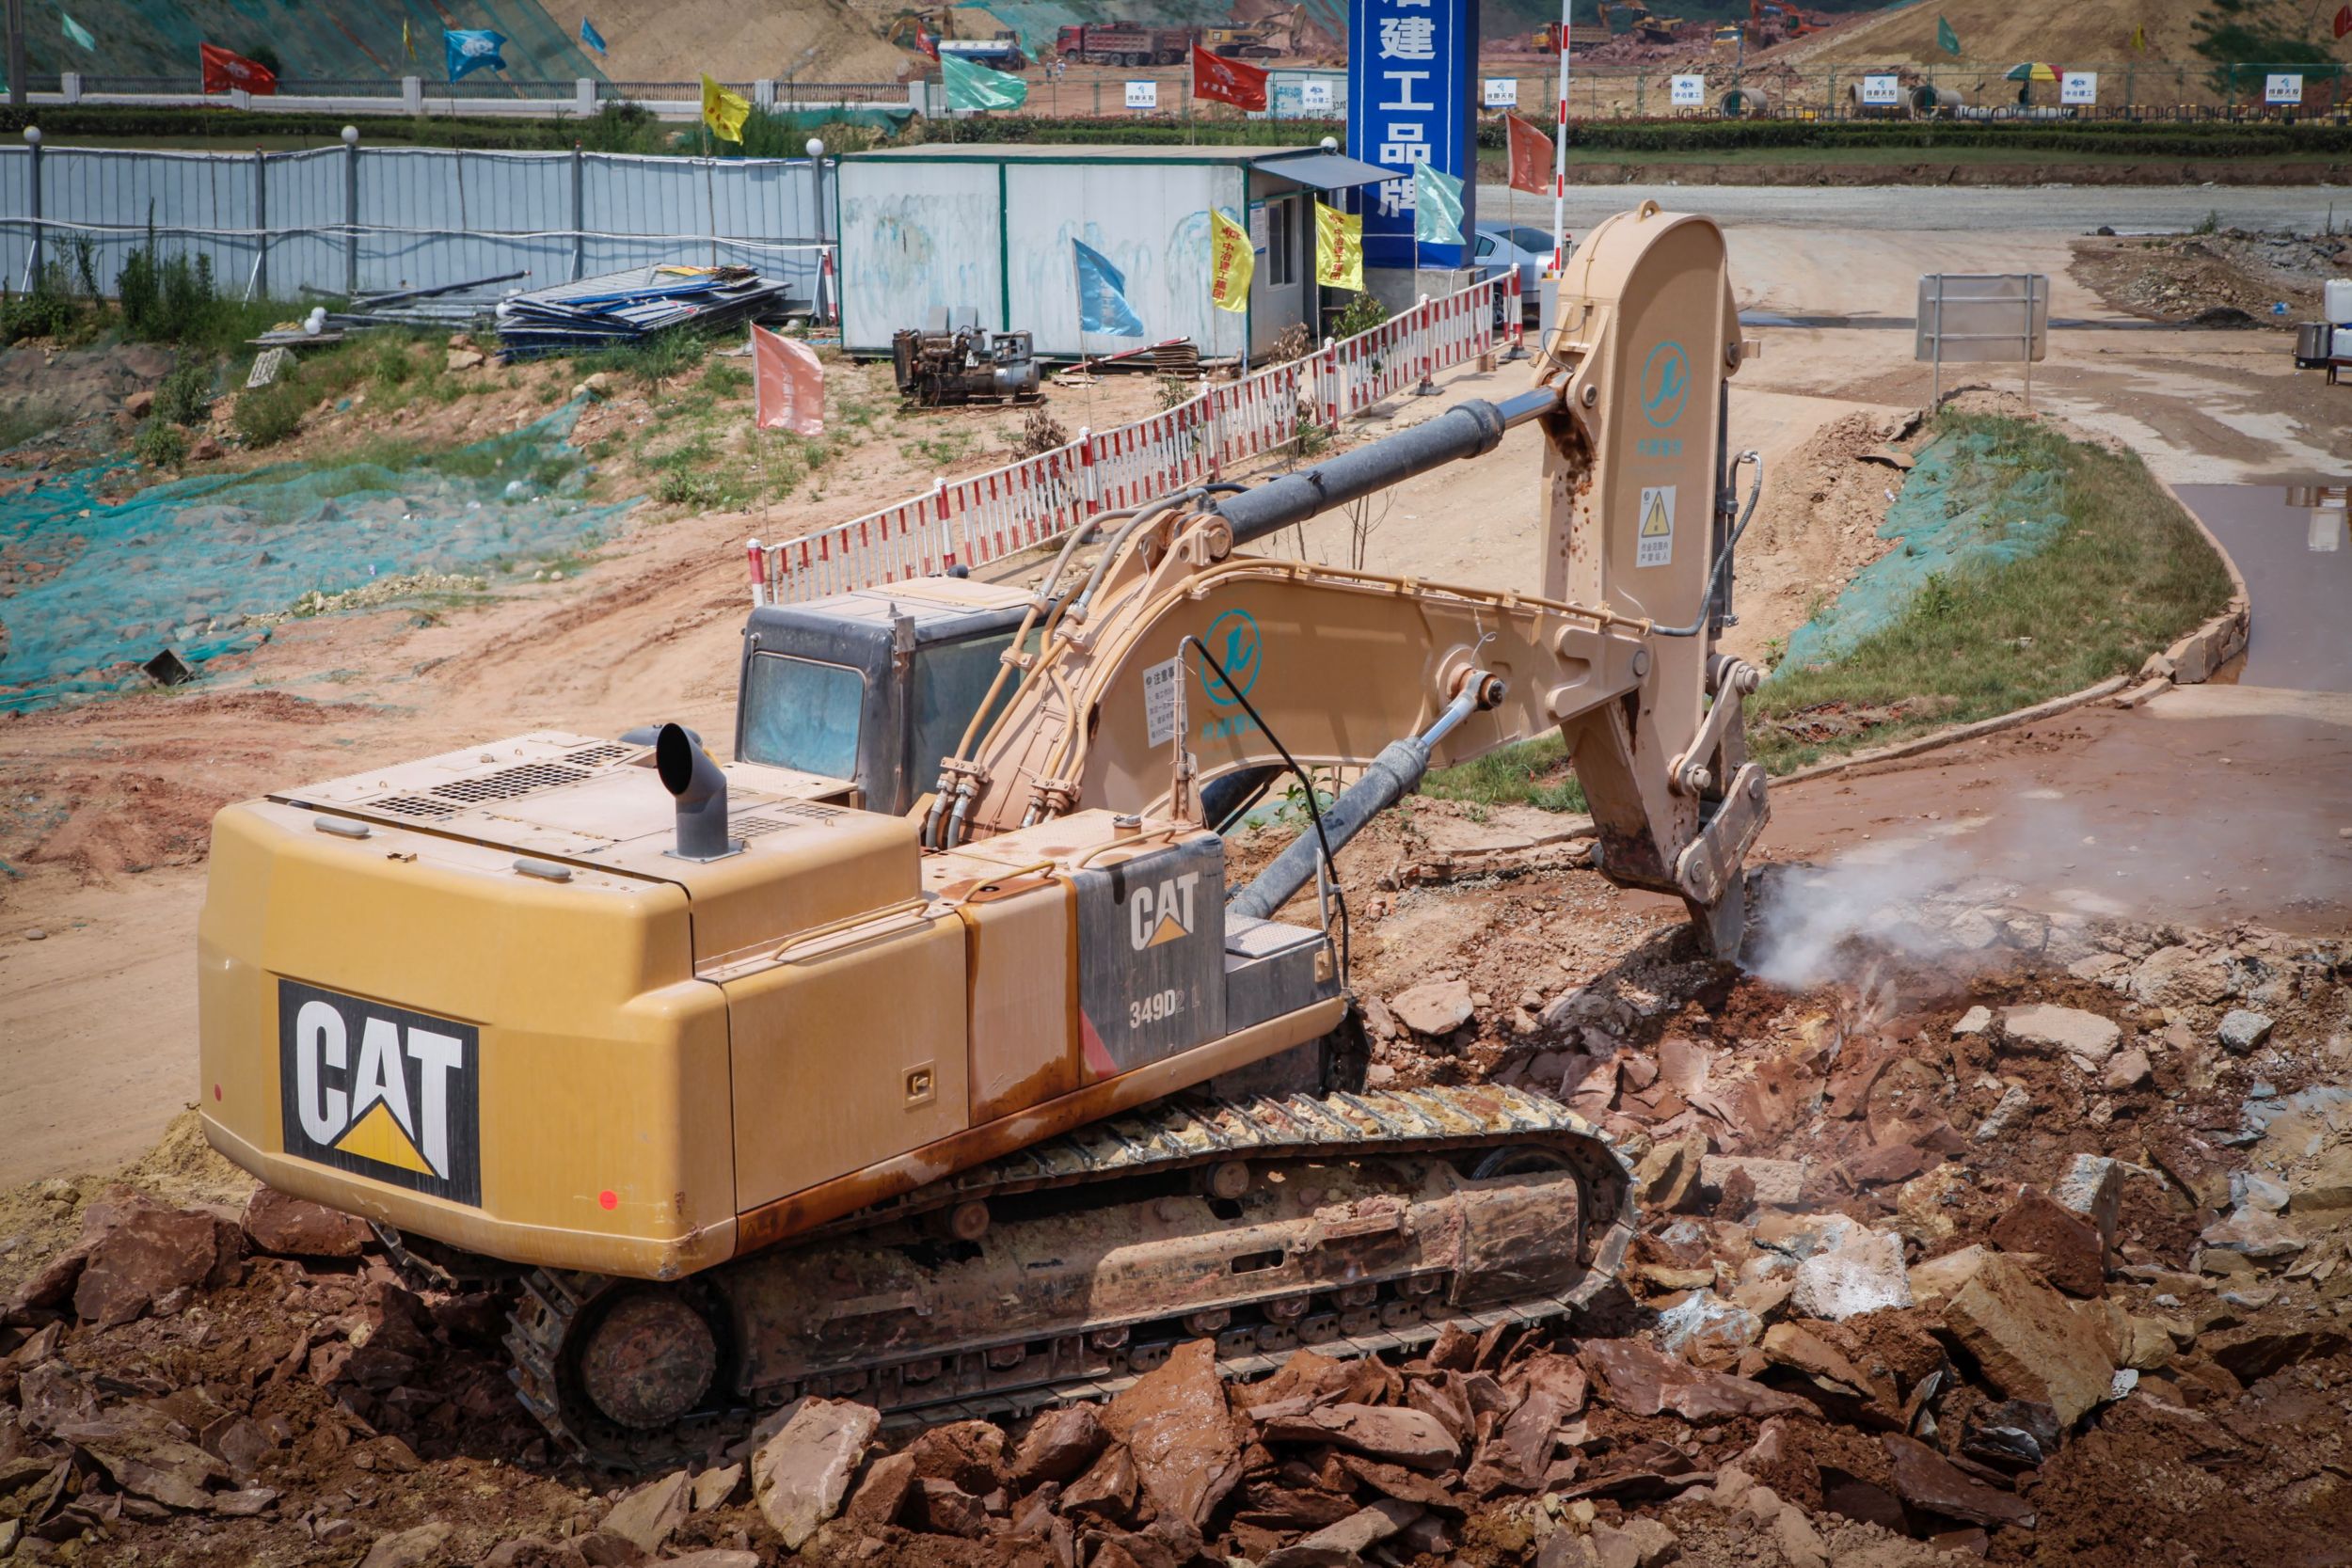 In China, ripper applications on excavators are commonly used in areas where blasting hard rock isn’t an option.